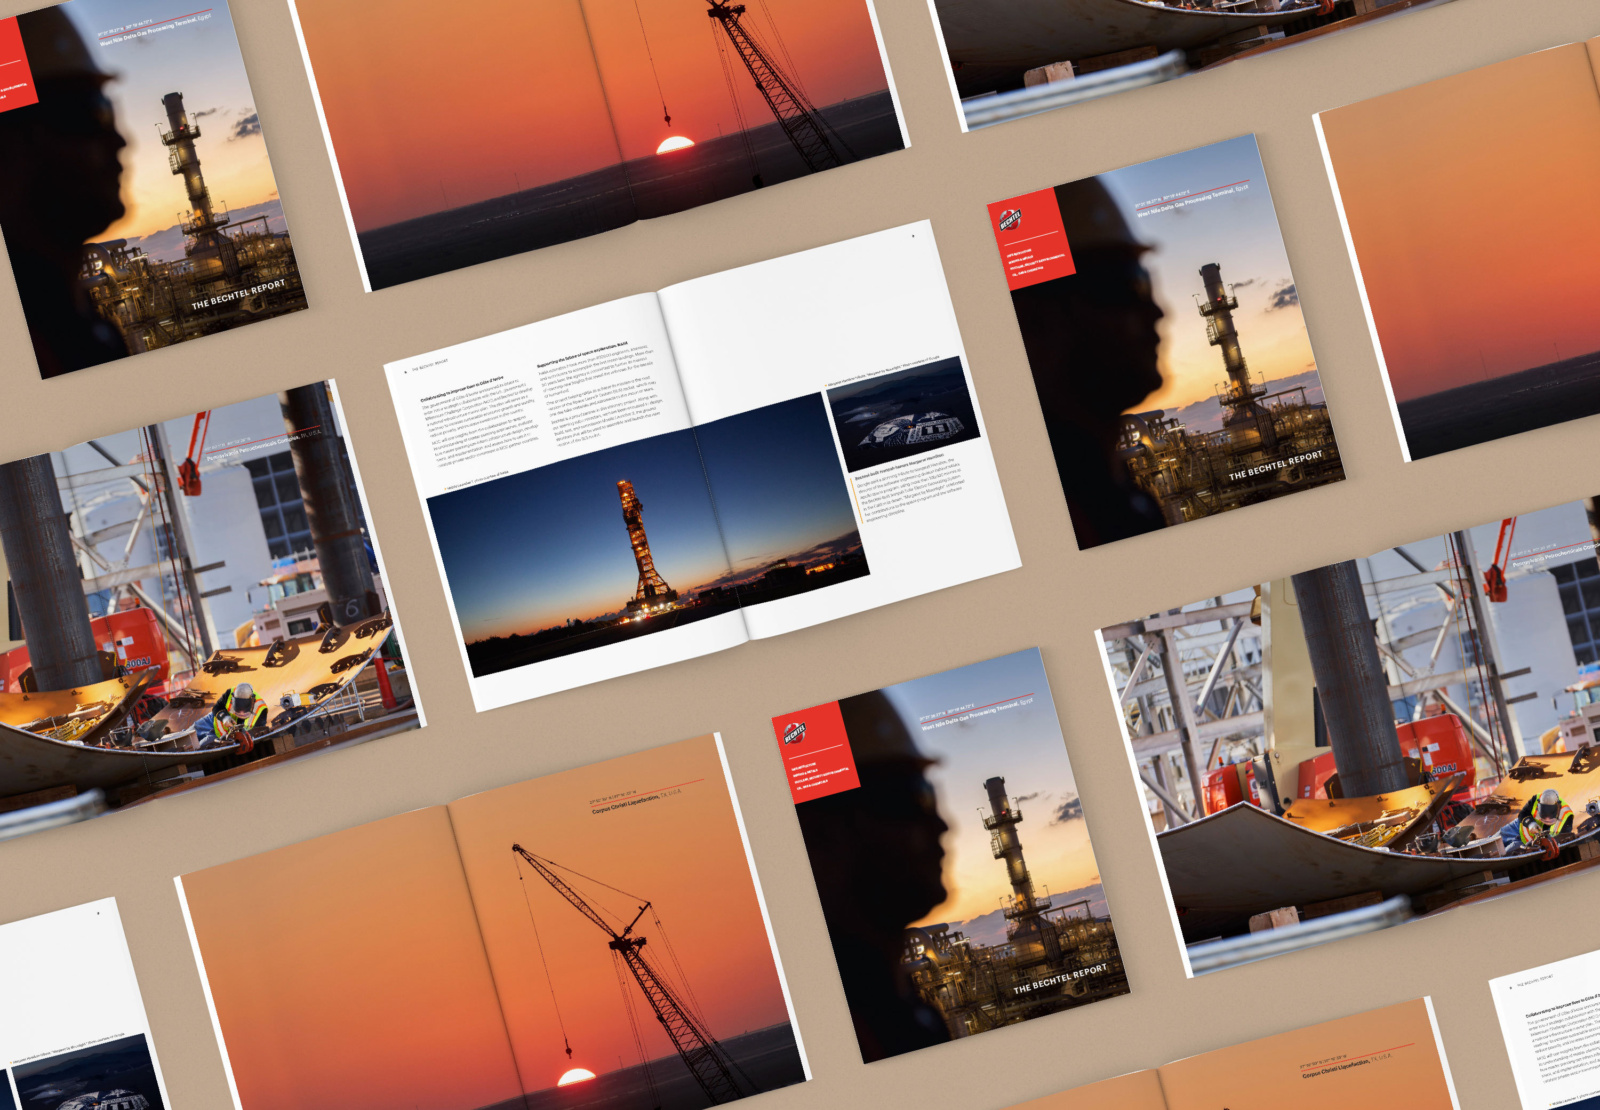 Array of spreads from the Bechtel annual report design